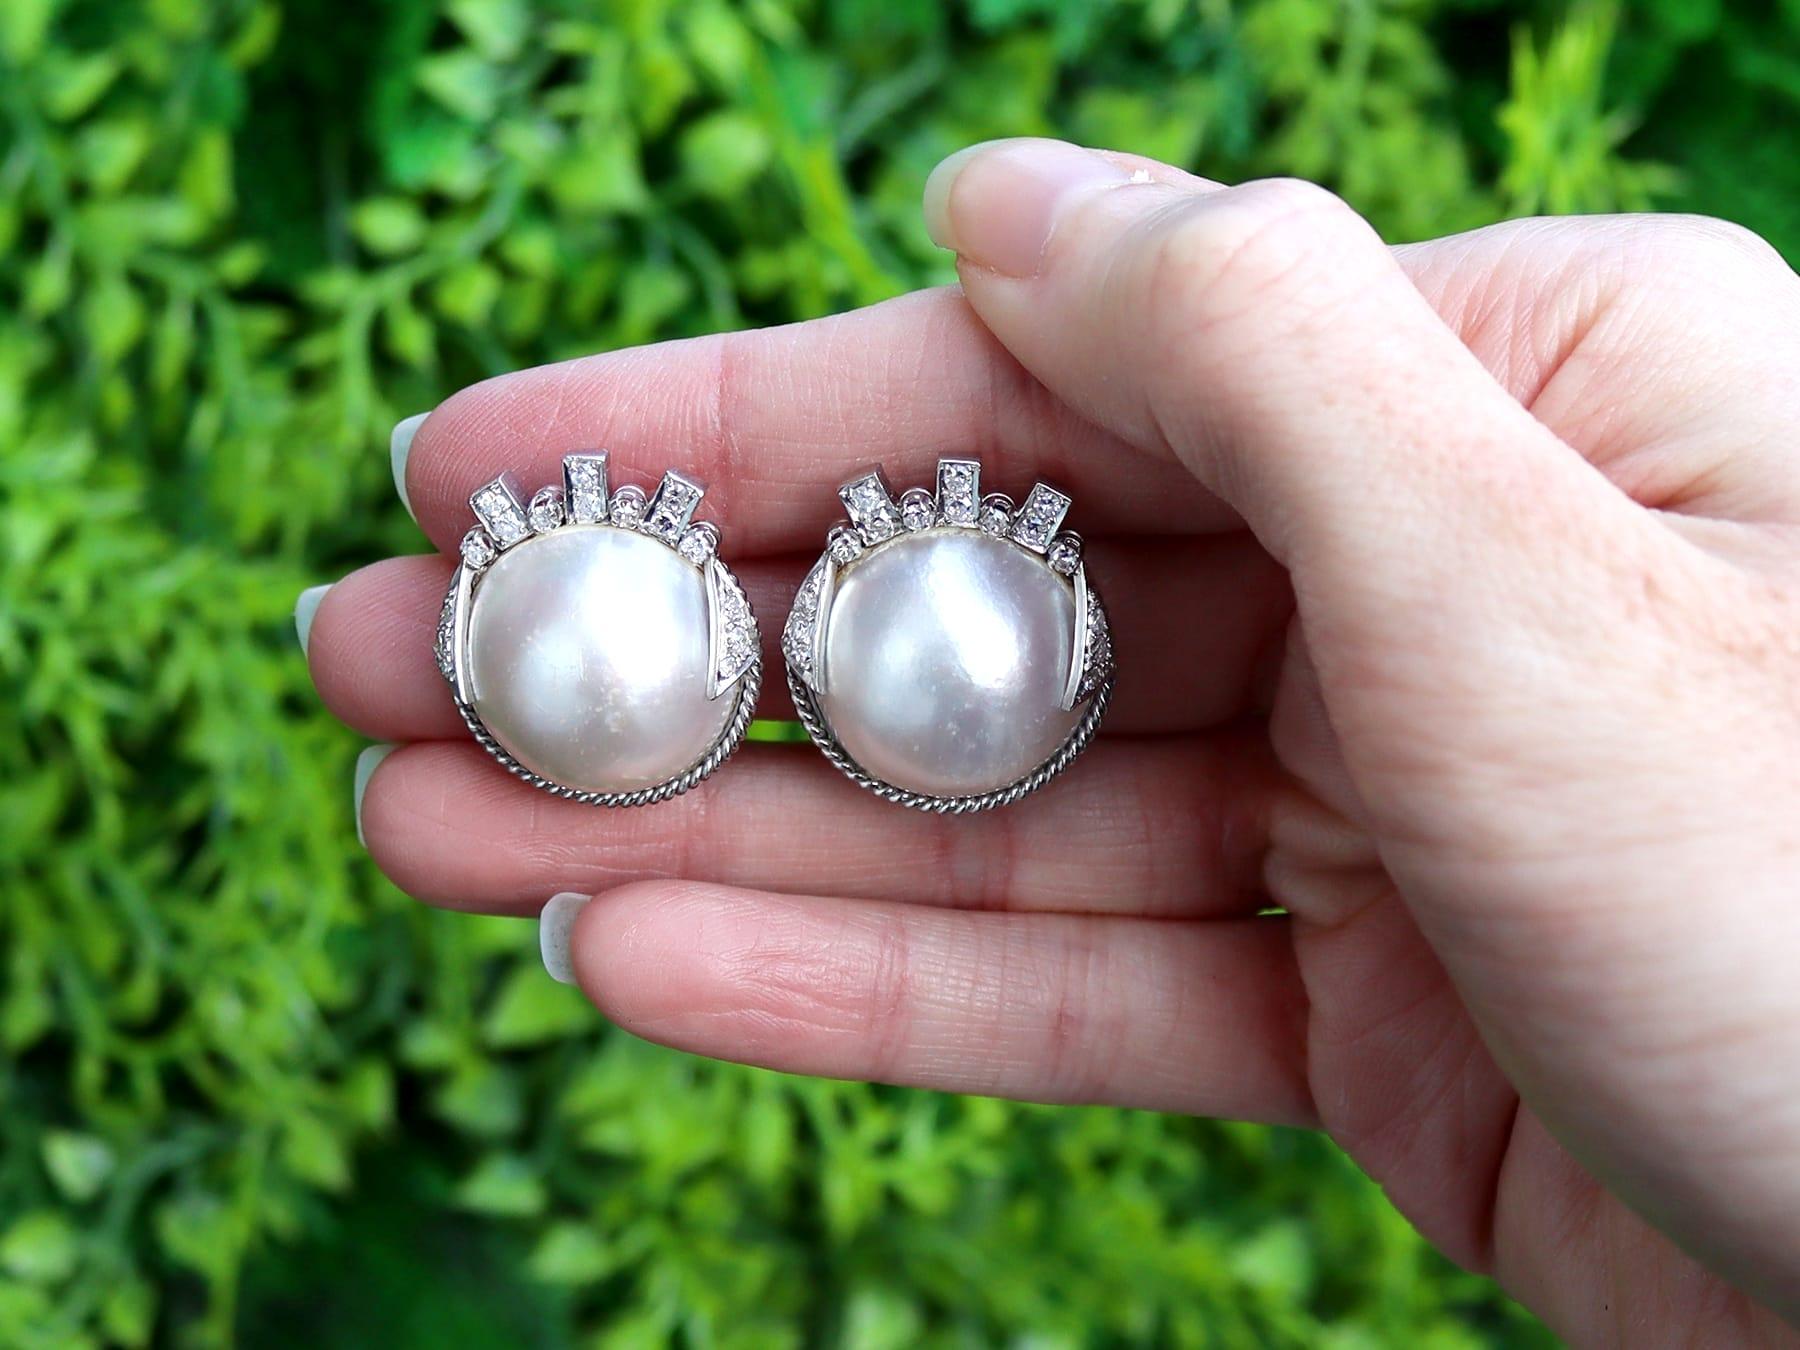 A stunning pair of mabe pearl and 0.78 carat (total) earrings in the Art Deco style in 9 karat white gold; part of our diverse jewelry and estate jewelry collections.

These impressive earrings have been crafted in 9k white gold.

Each earring